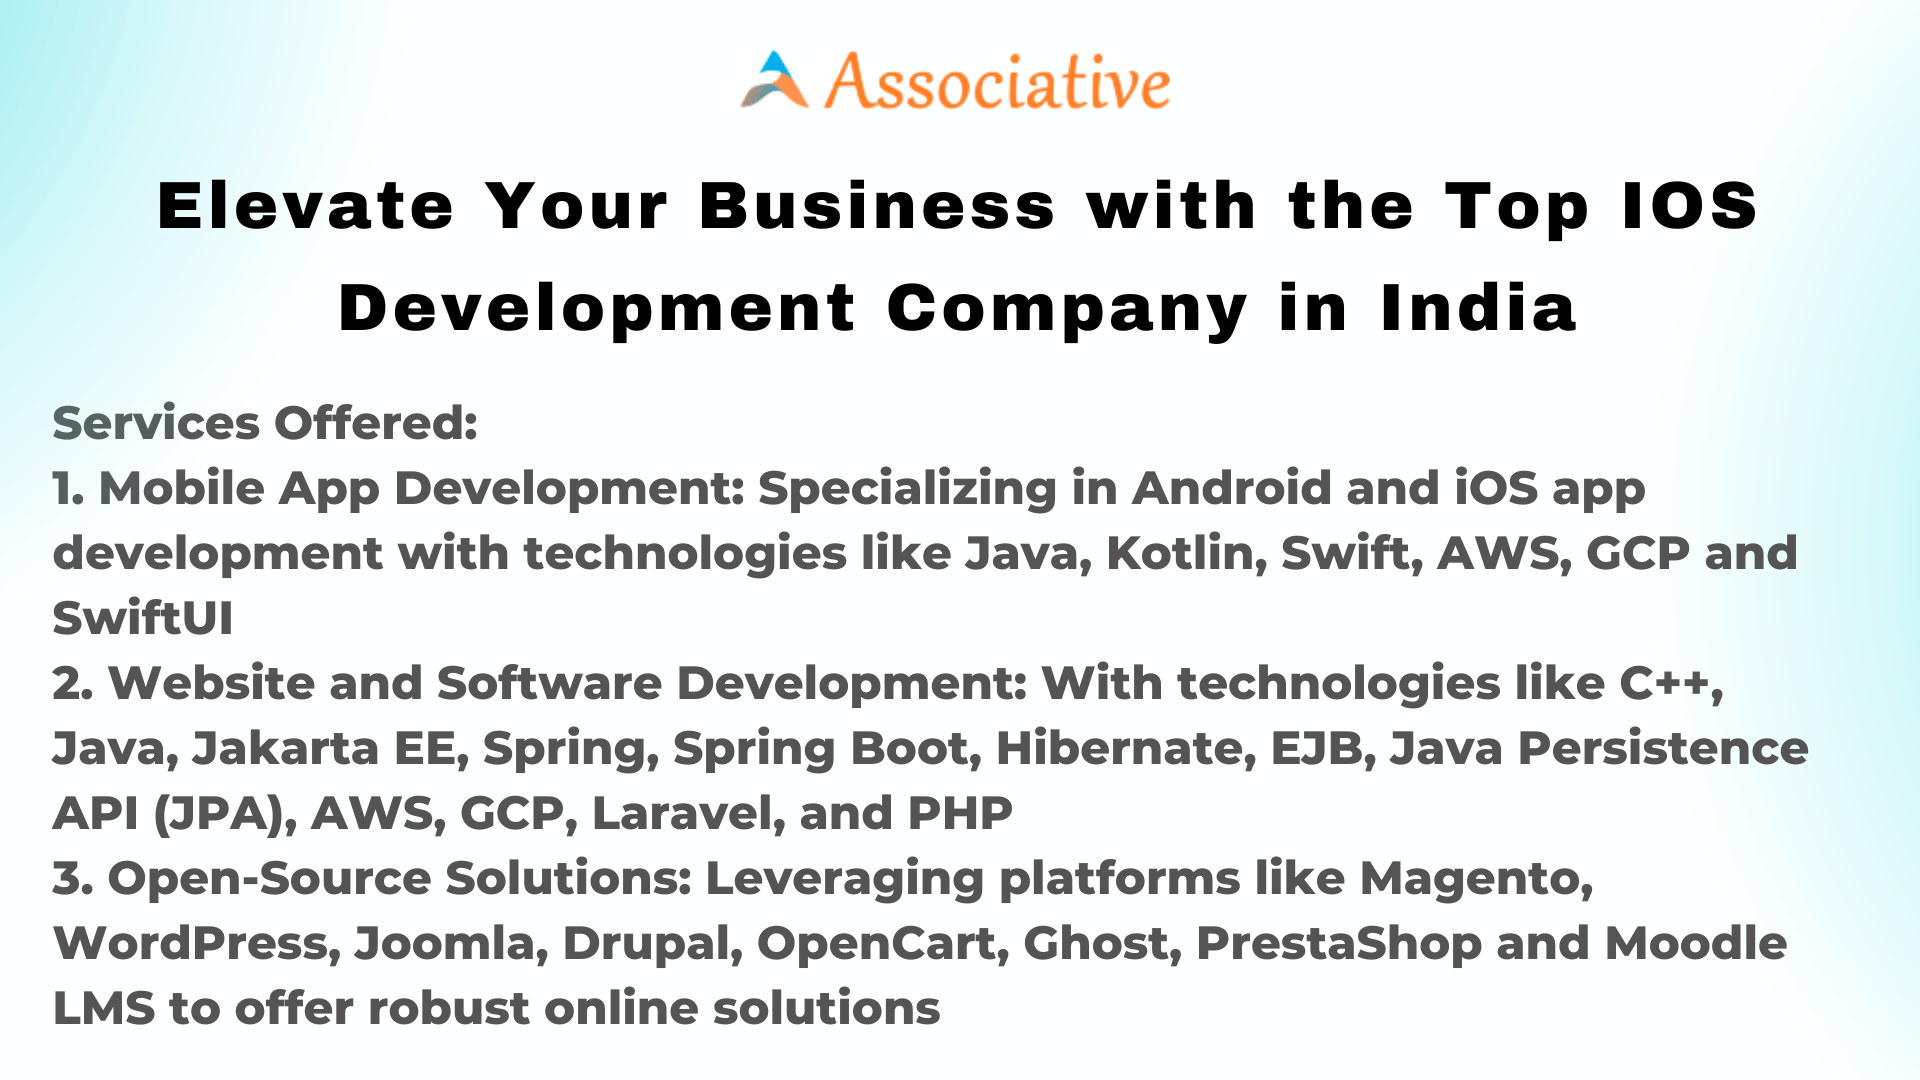 Elevate Your Business with the Top IOS Development Company in India